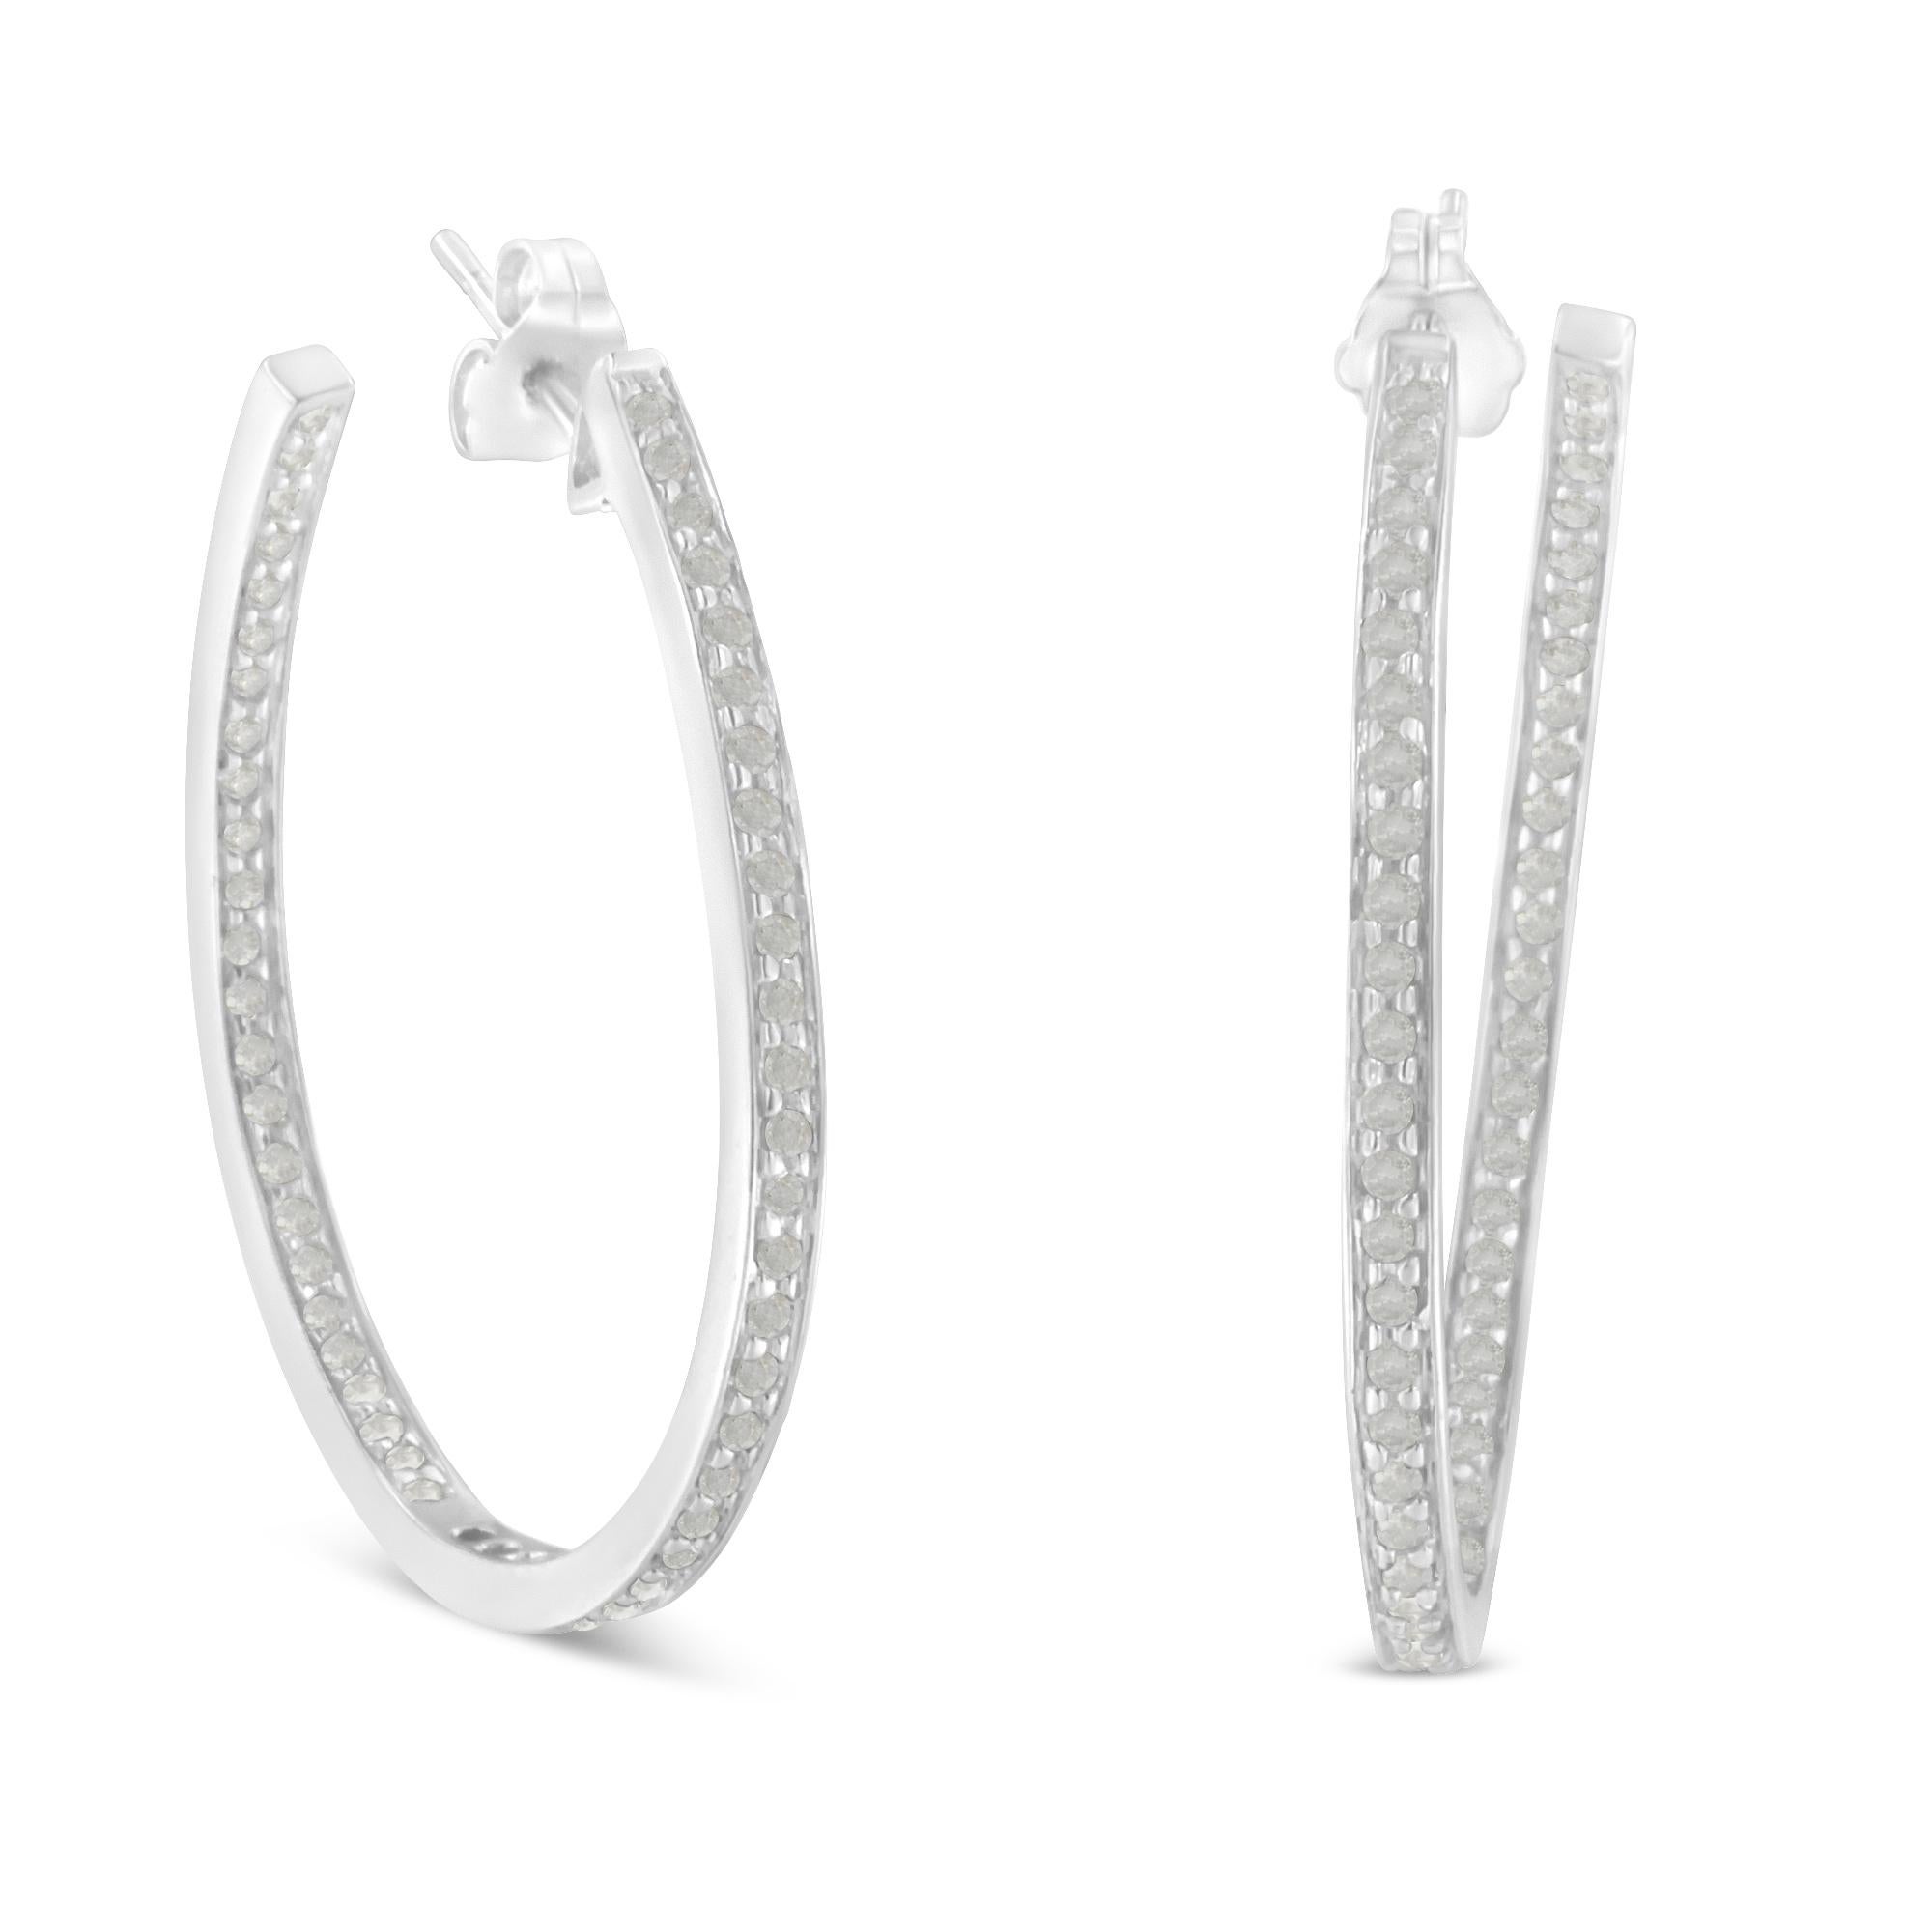 These glamorous 10k white gold hoop earrings showcase 1ct of round cut diamonds. The prong set diamonds inlay half the inside and outside of the hoops giving them maximum sparkle. These inside out hoop earrings are the perfect gift for that trendy,